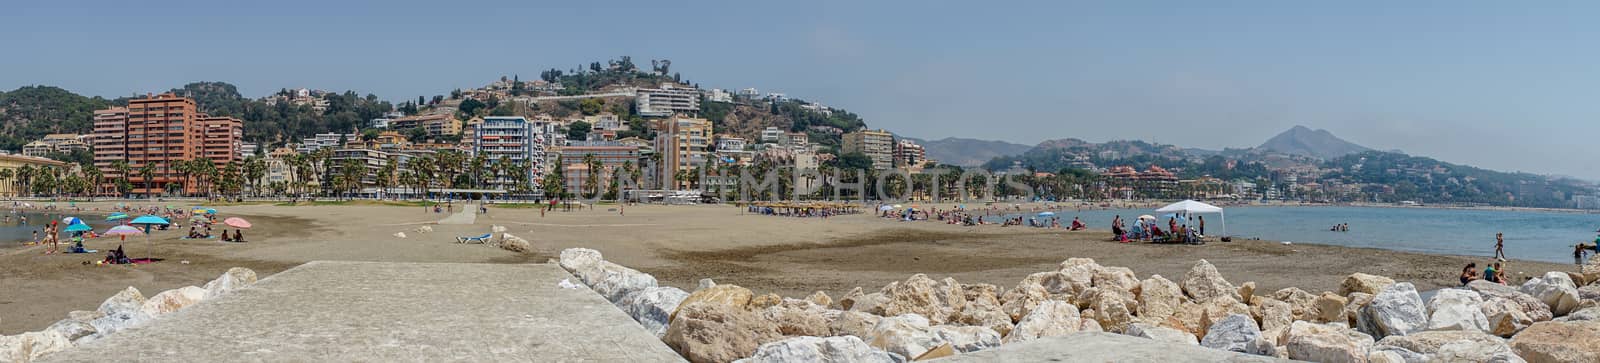 Panoramic view of the ocean at Malagueta beach with rocks at Malaga, Spain, Europe on a clear sky morning